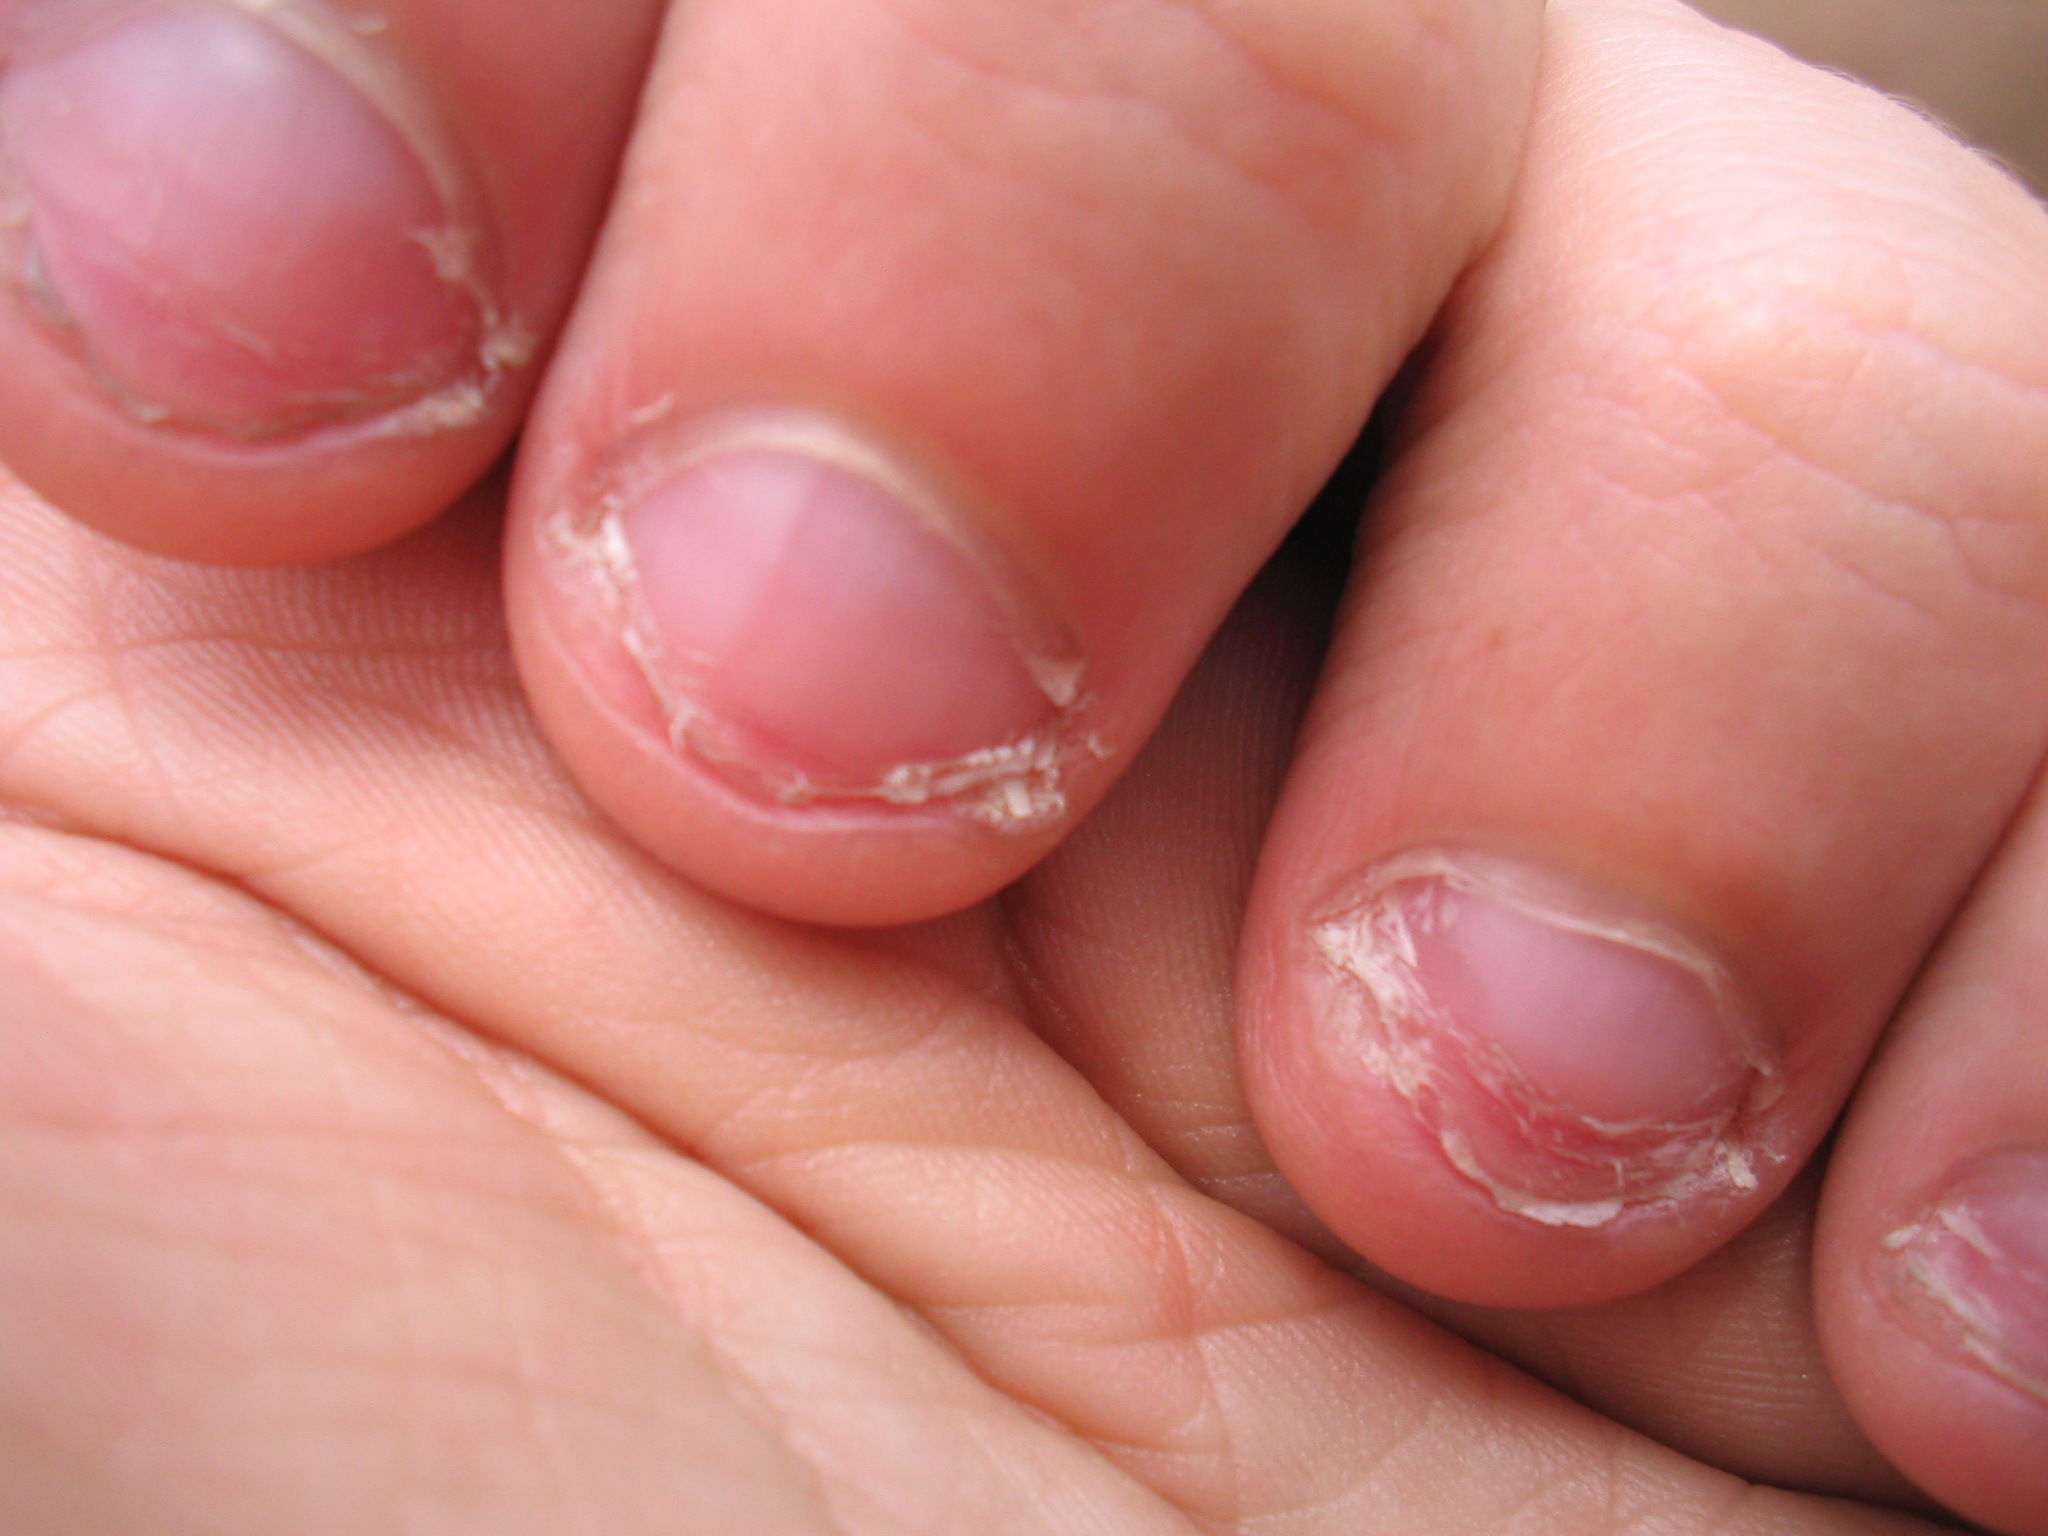 Why Do People Bite Their Nails (& 5 Ways to Stop Nail Biting)